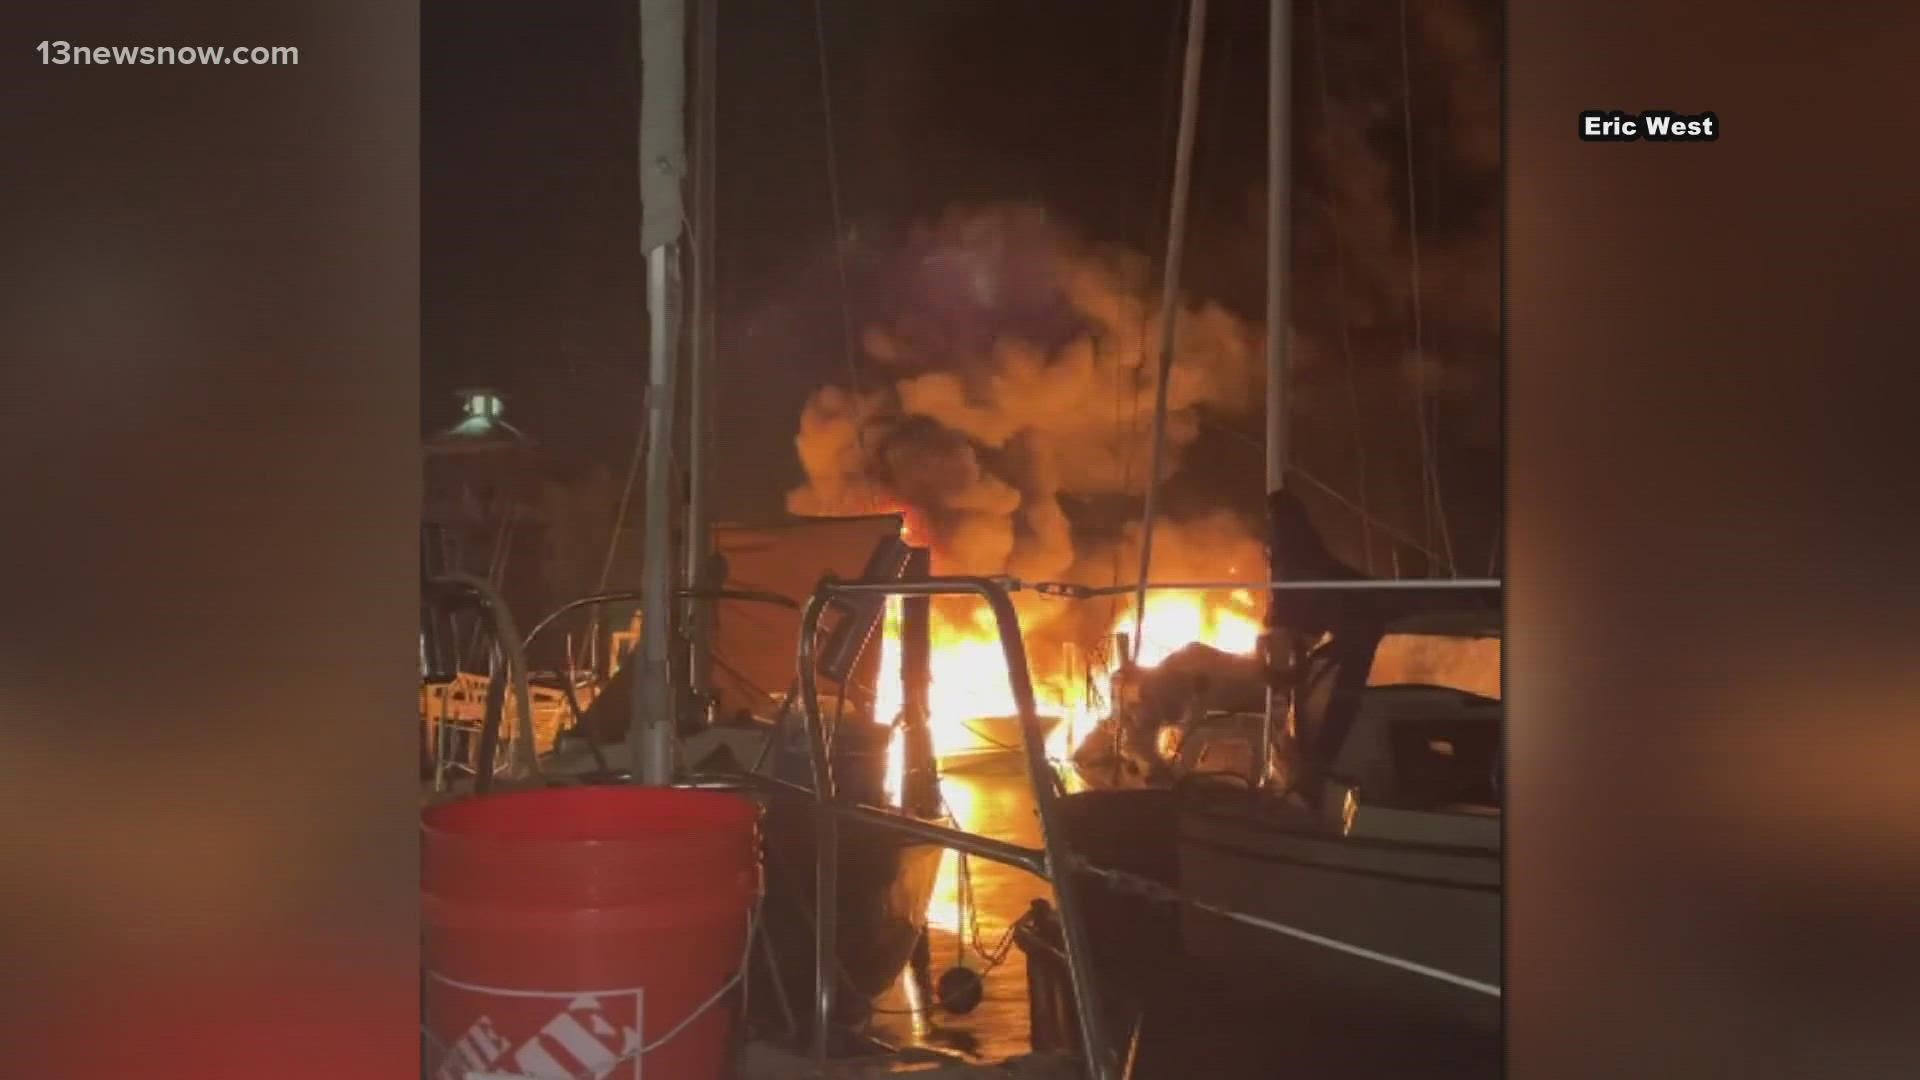 Norfolk emergency officials and the U.S. Coast Guard were on the scene of a fire that broke out at the Little Creek Marina.